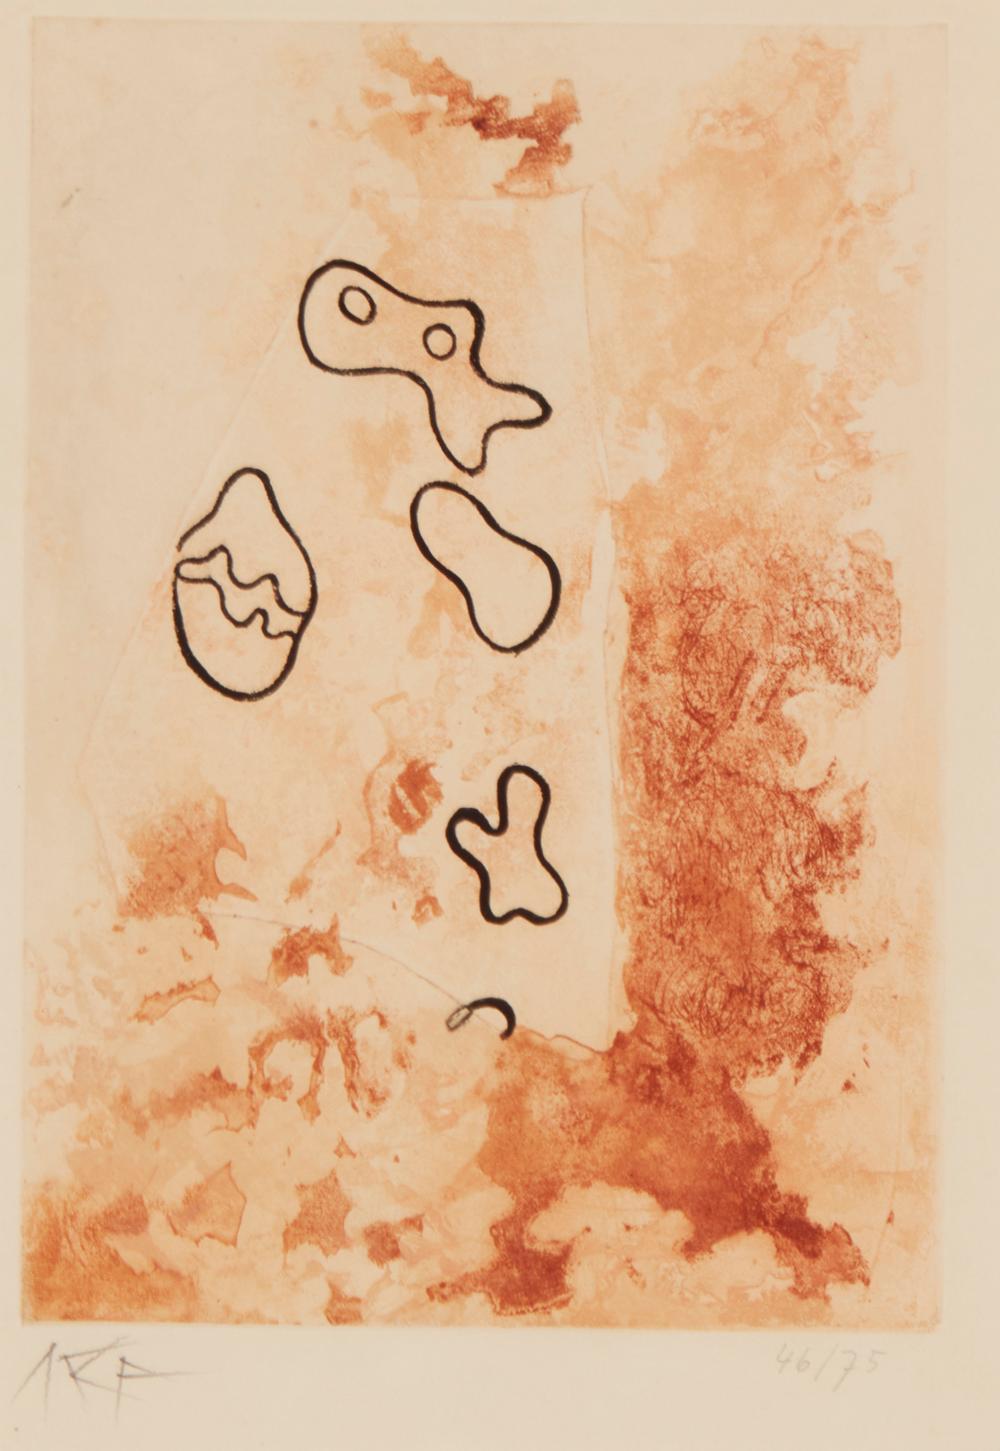 AFTER JEAN ARP (1887-1966), "COMPOSITION